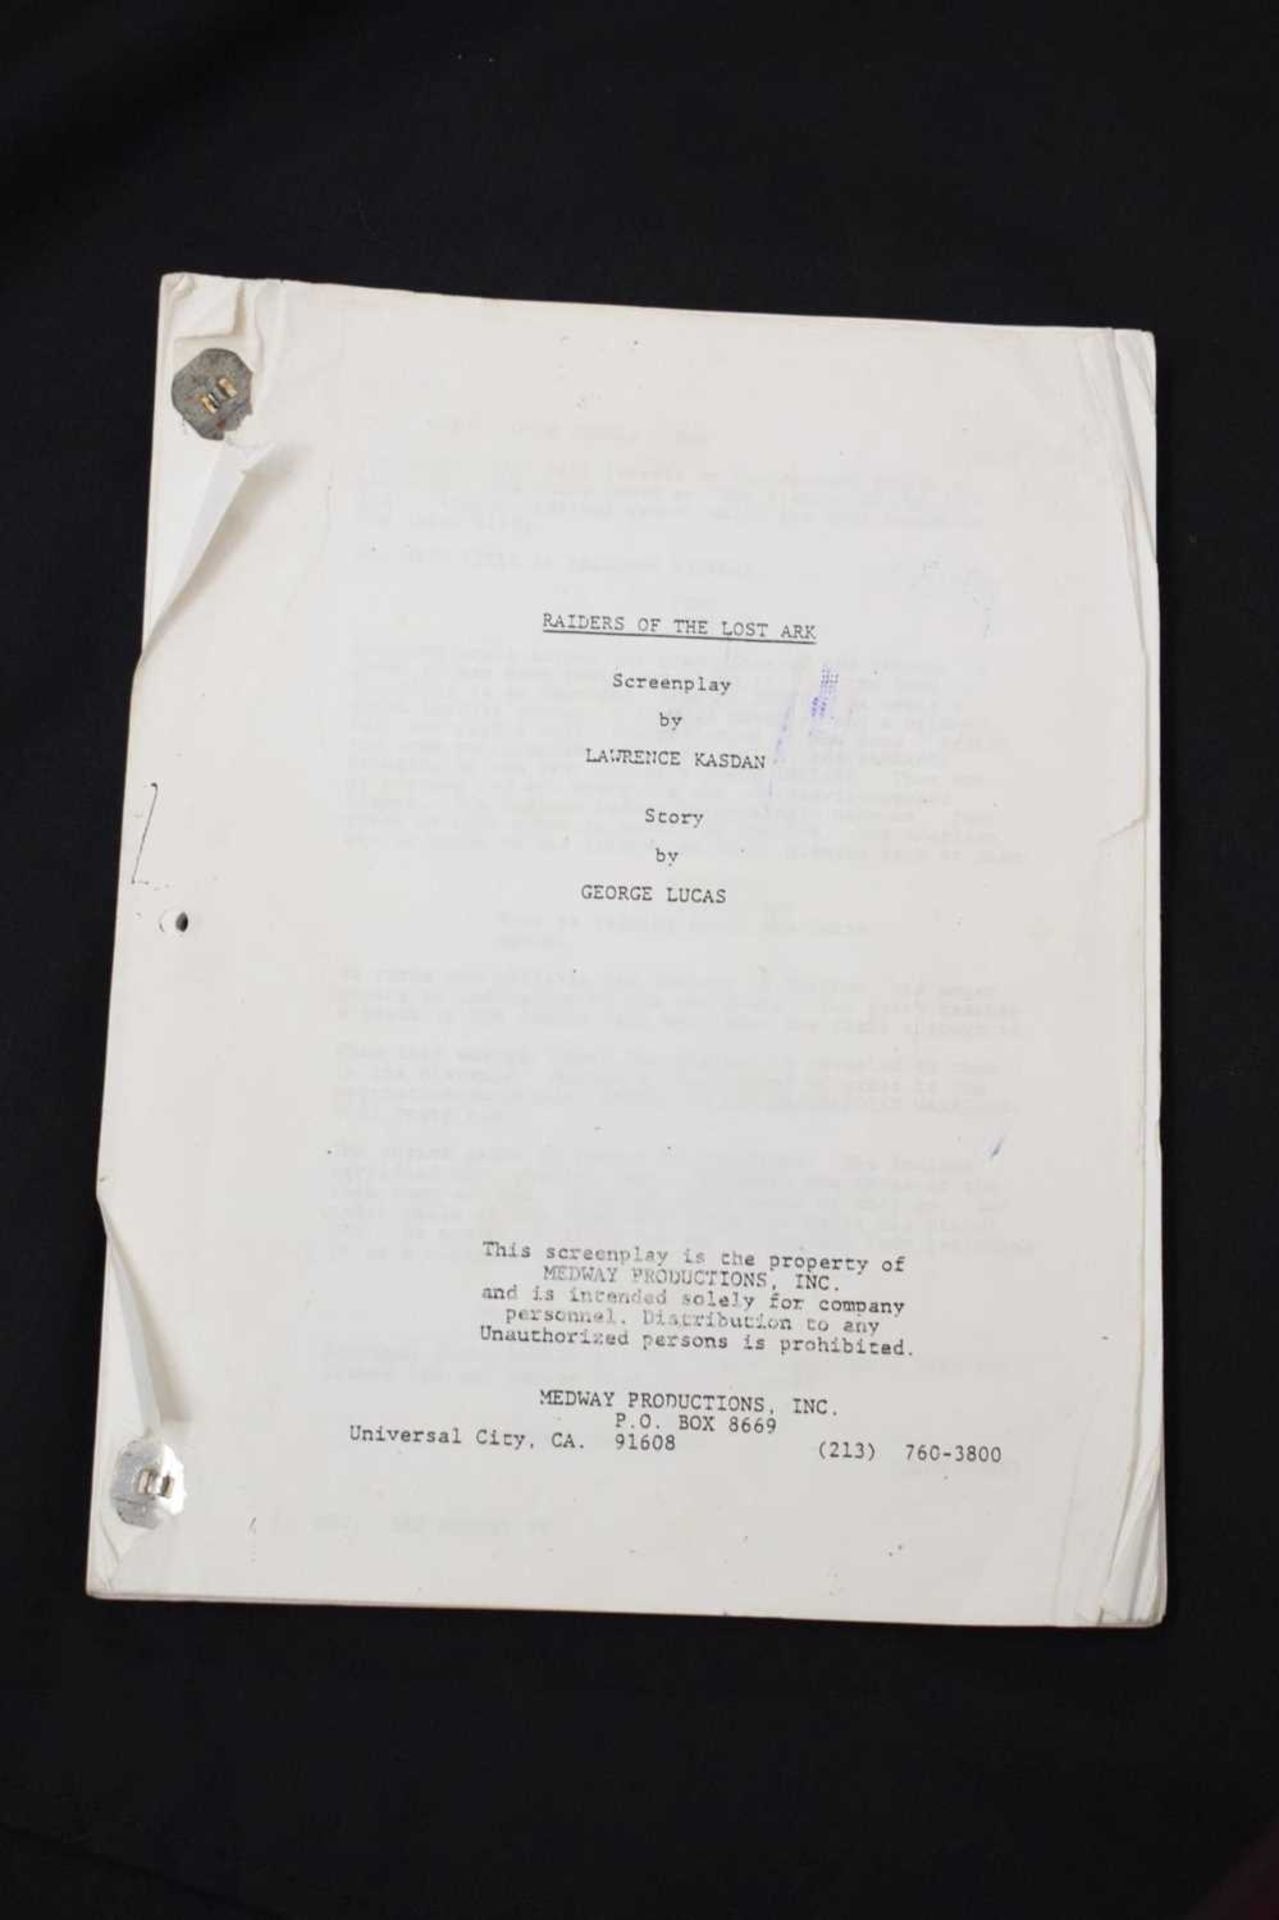 Raiders of the Lost Ark (1981) draft screenplay film script - third revised edition - Image 2 of 10